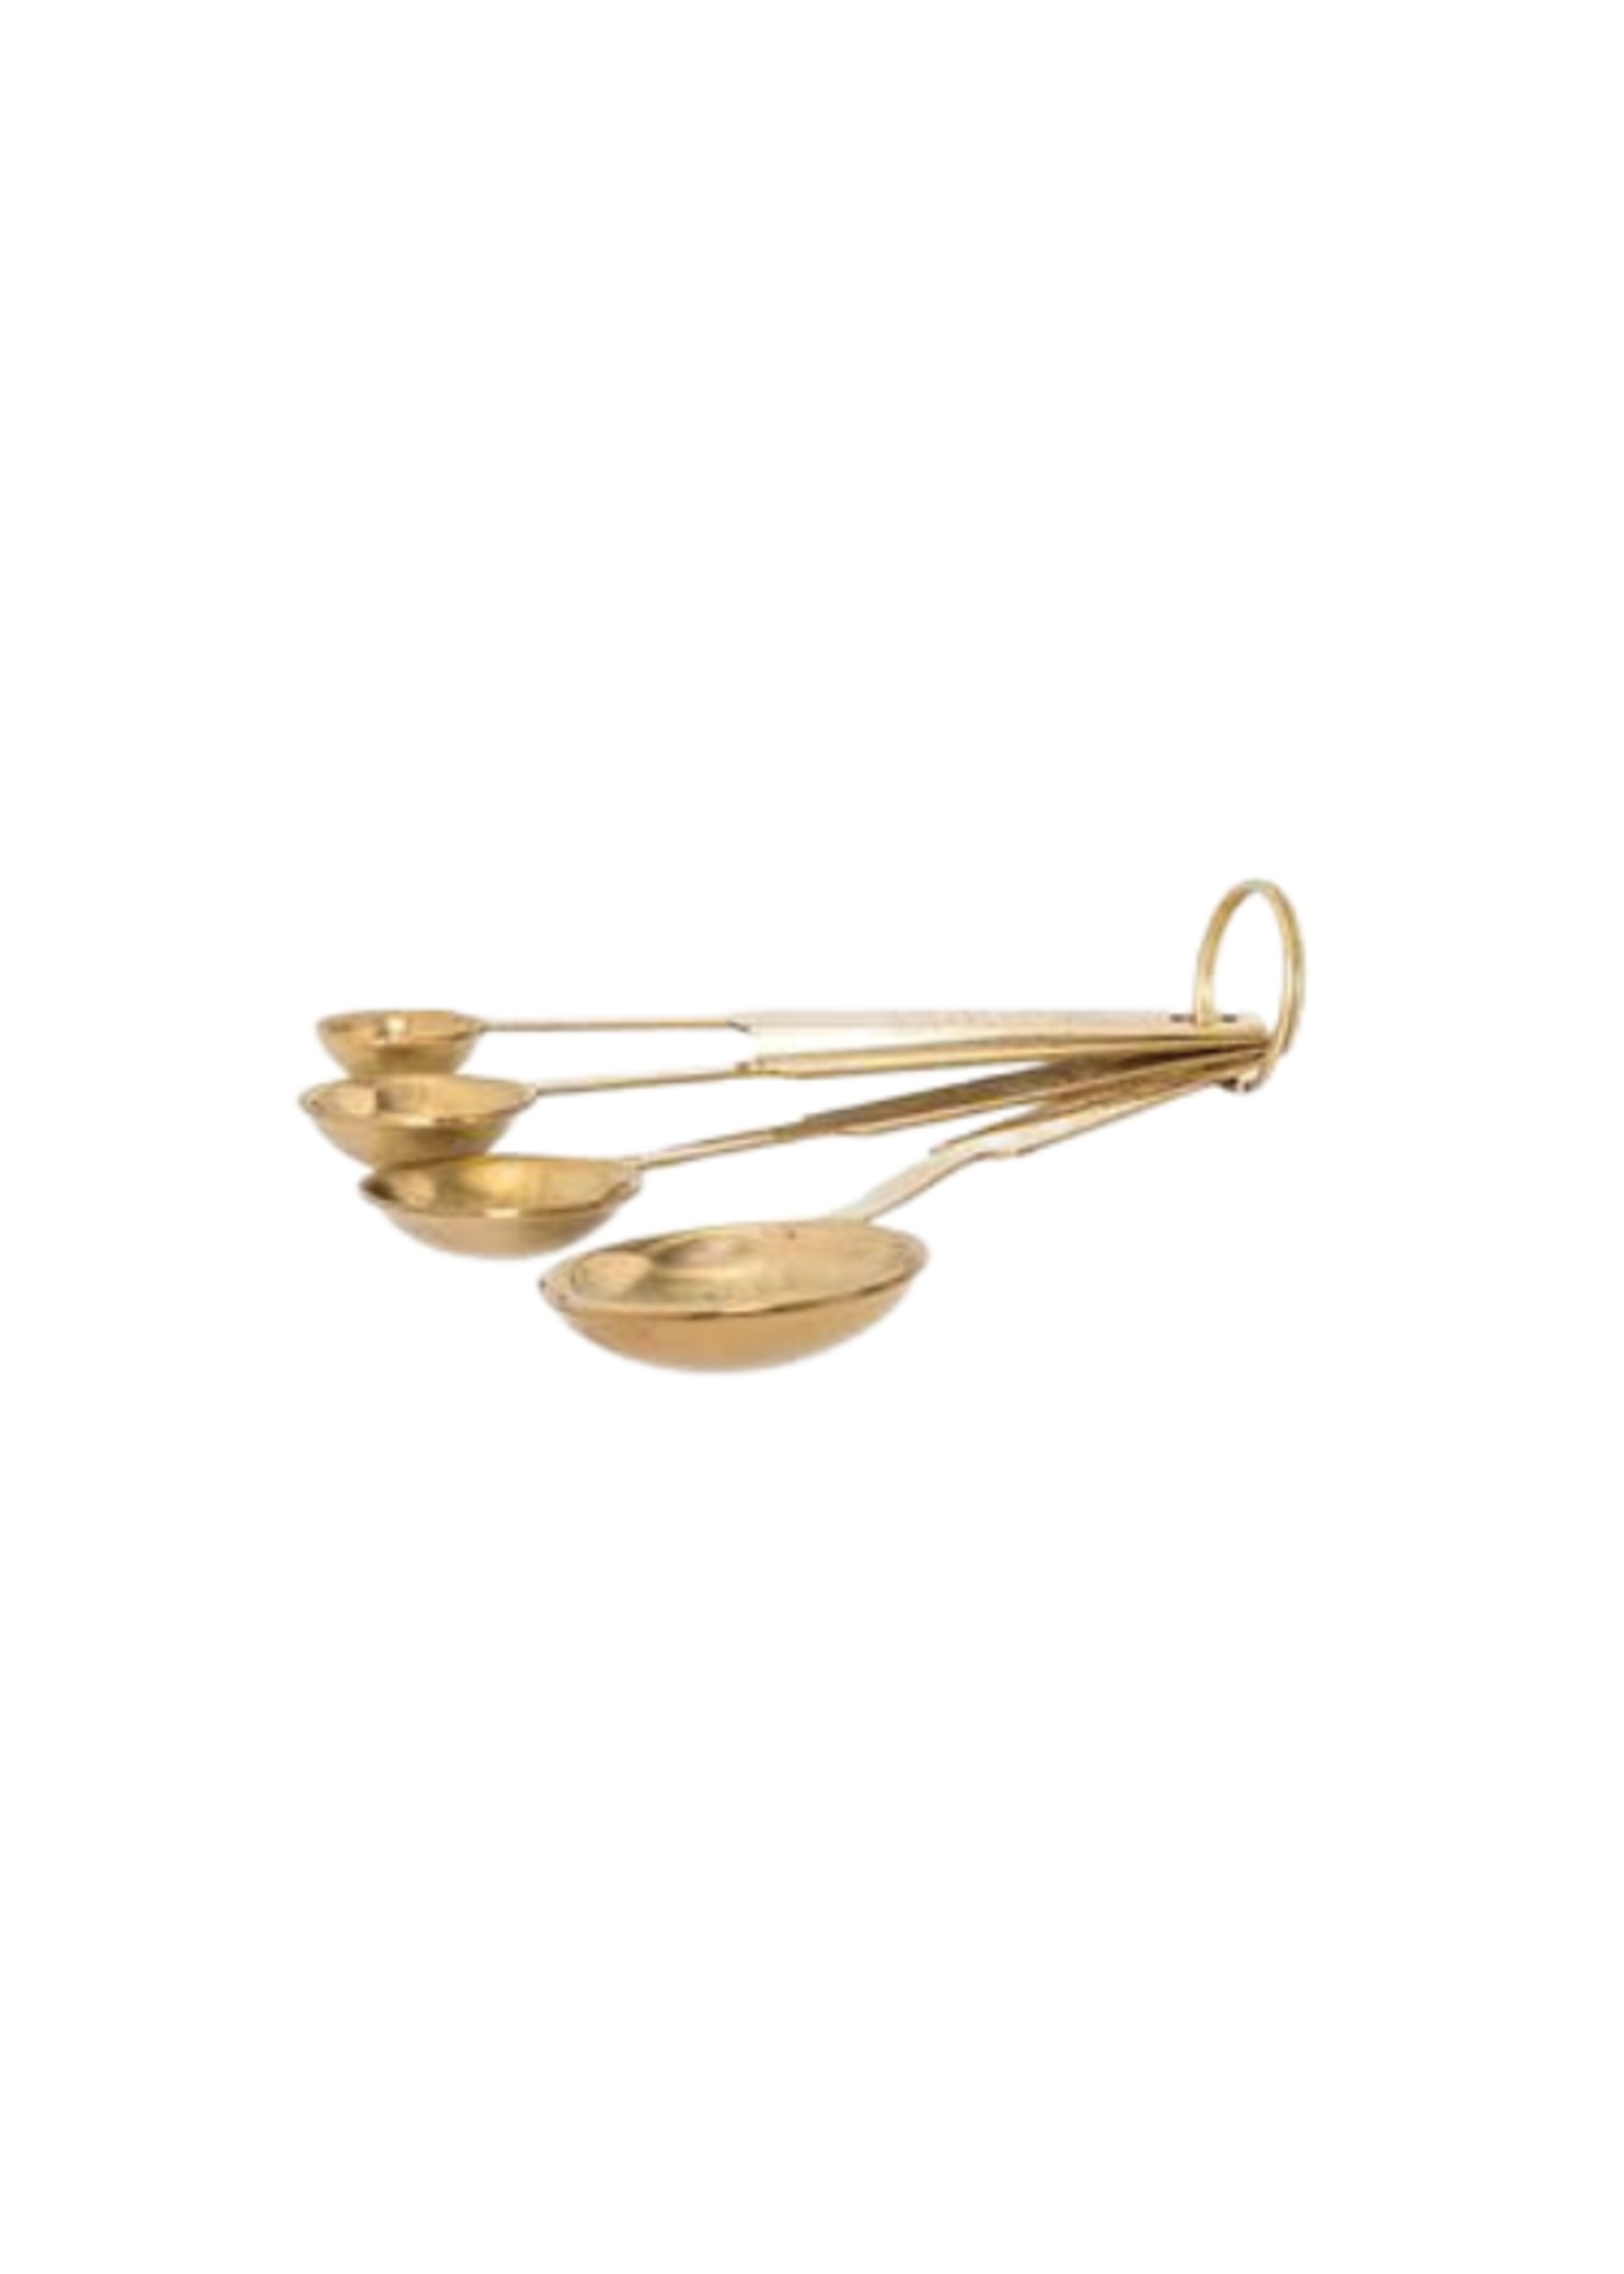 Measuring Spoons - Gold (Set of 4)